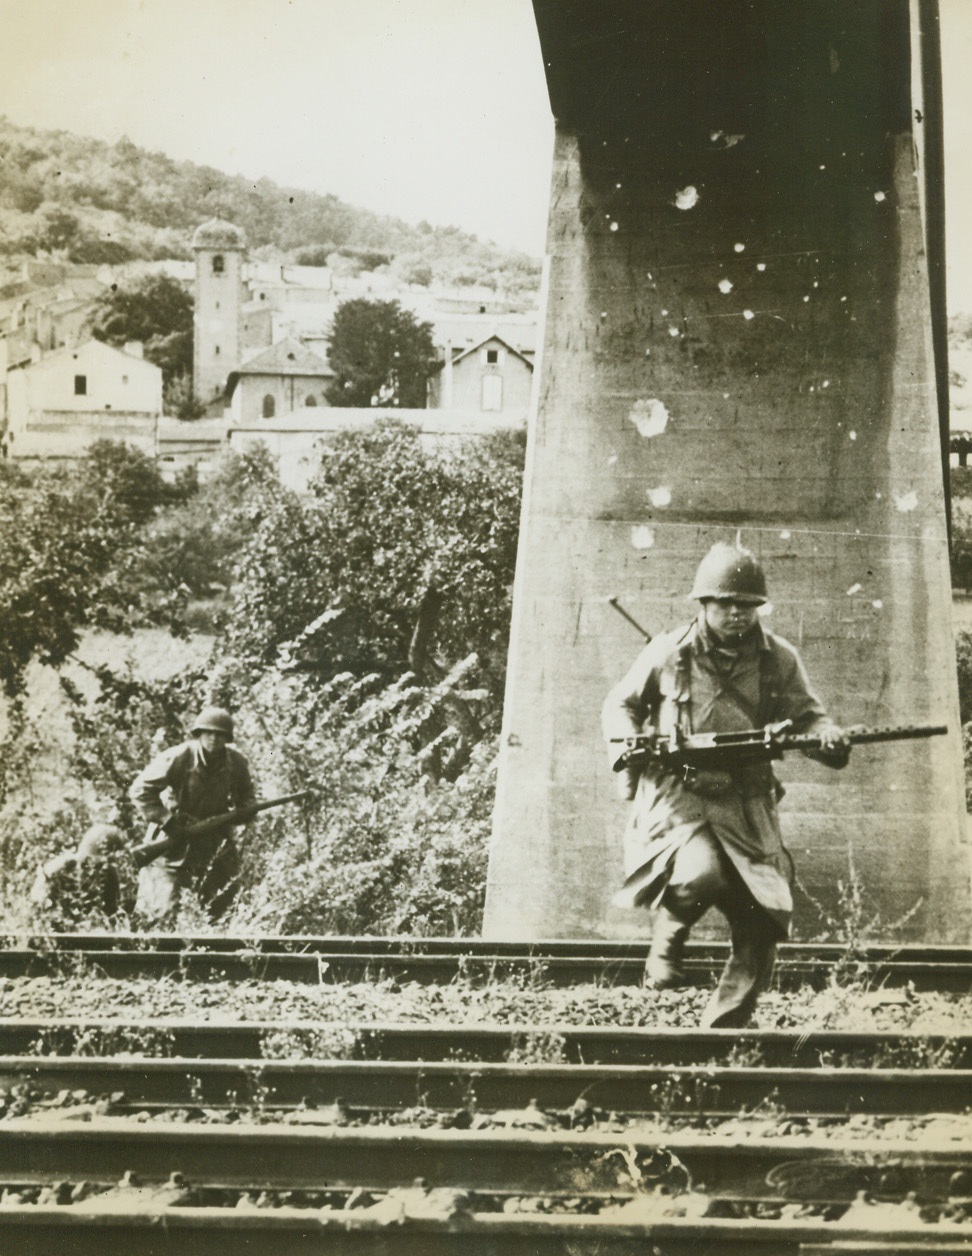 Enemy Fire No Obstacle, 9/13/1944. France -- American infantrymen dash across a railway near Metz, France, close to the German border. They crouch low to escape Nazi fire. Note the bullet-pocked pylon behind the foremost Yank. Credit: Signal Corps photo from ACME;